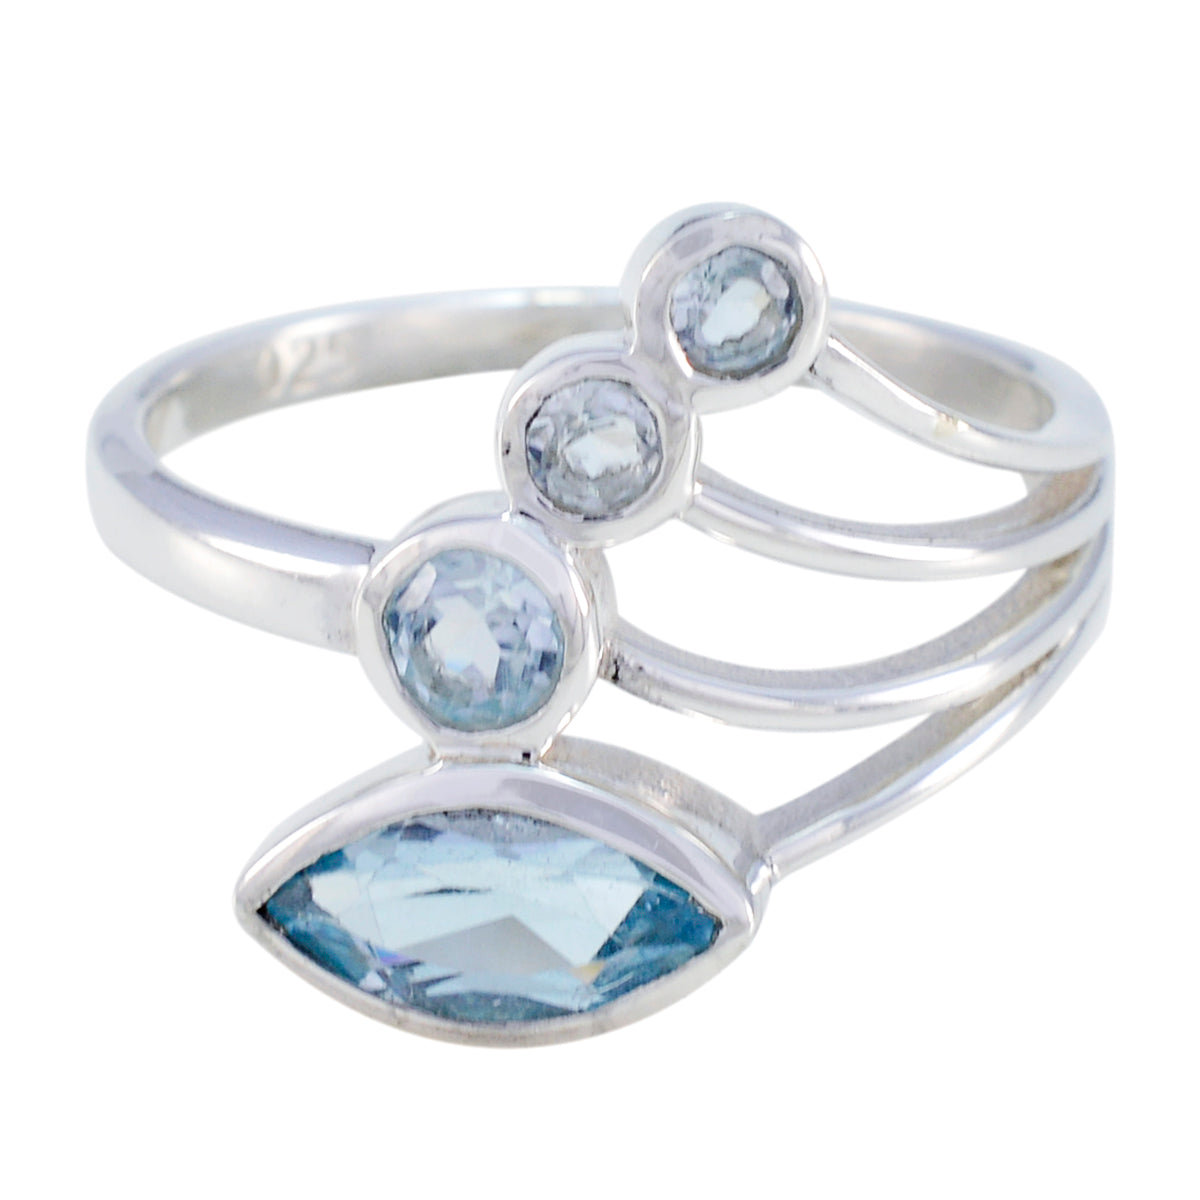 Magnificent Gemstones Blue Topaz Sterling Silver Rings Love Jewelry